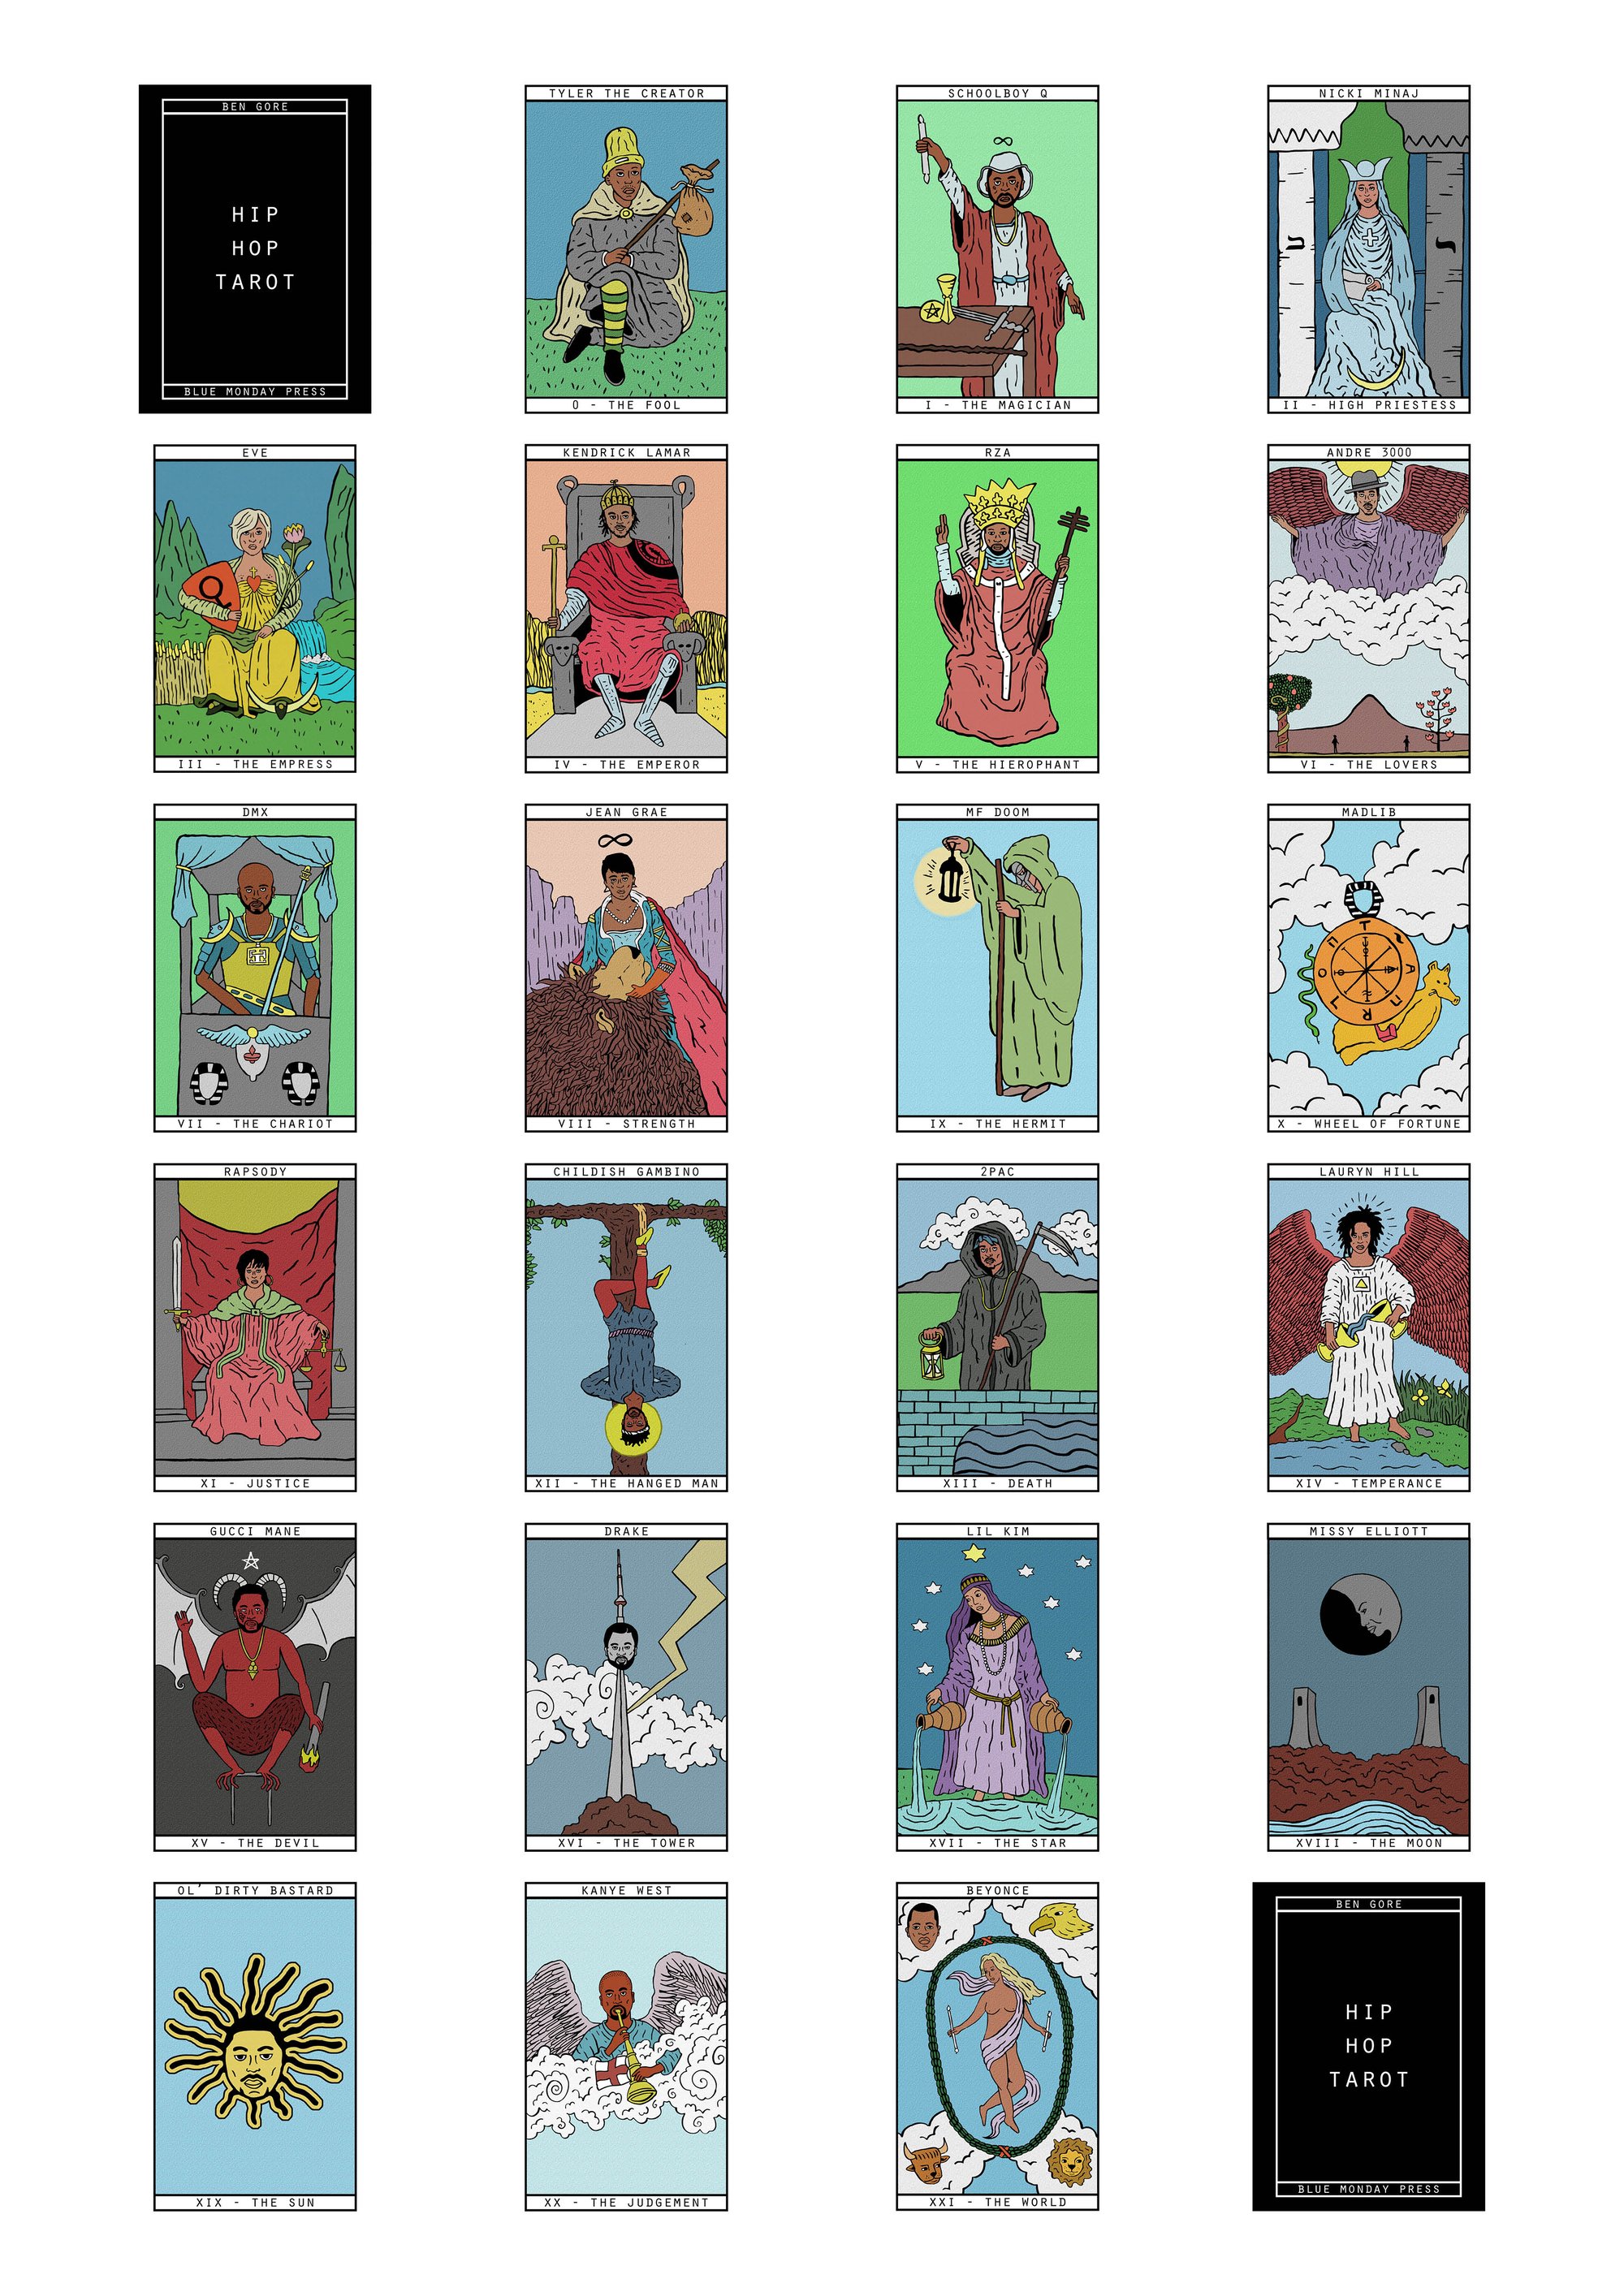 10 Amazing Printable Tarot Cards to Use Immediately